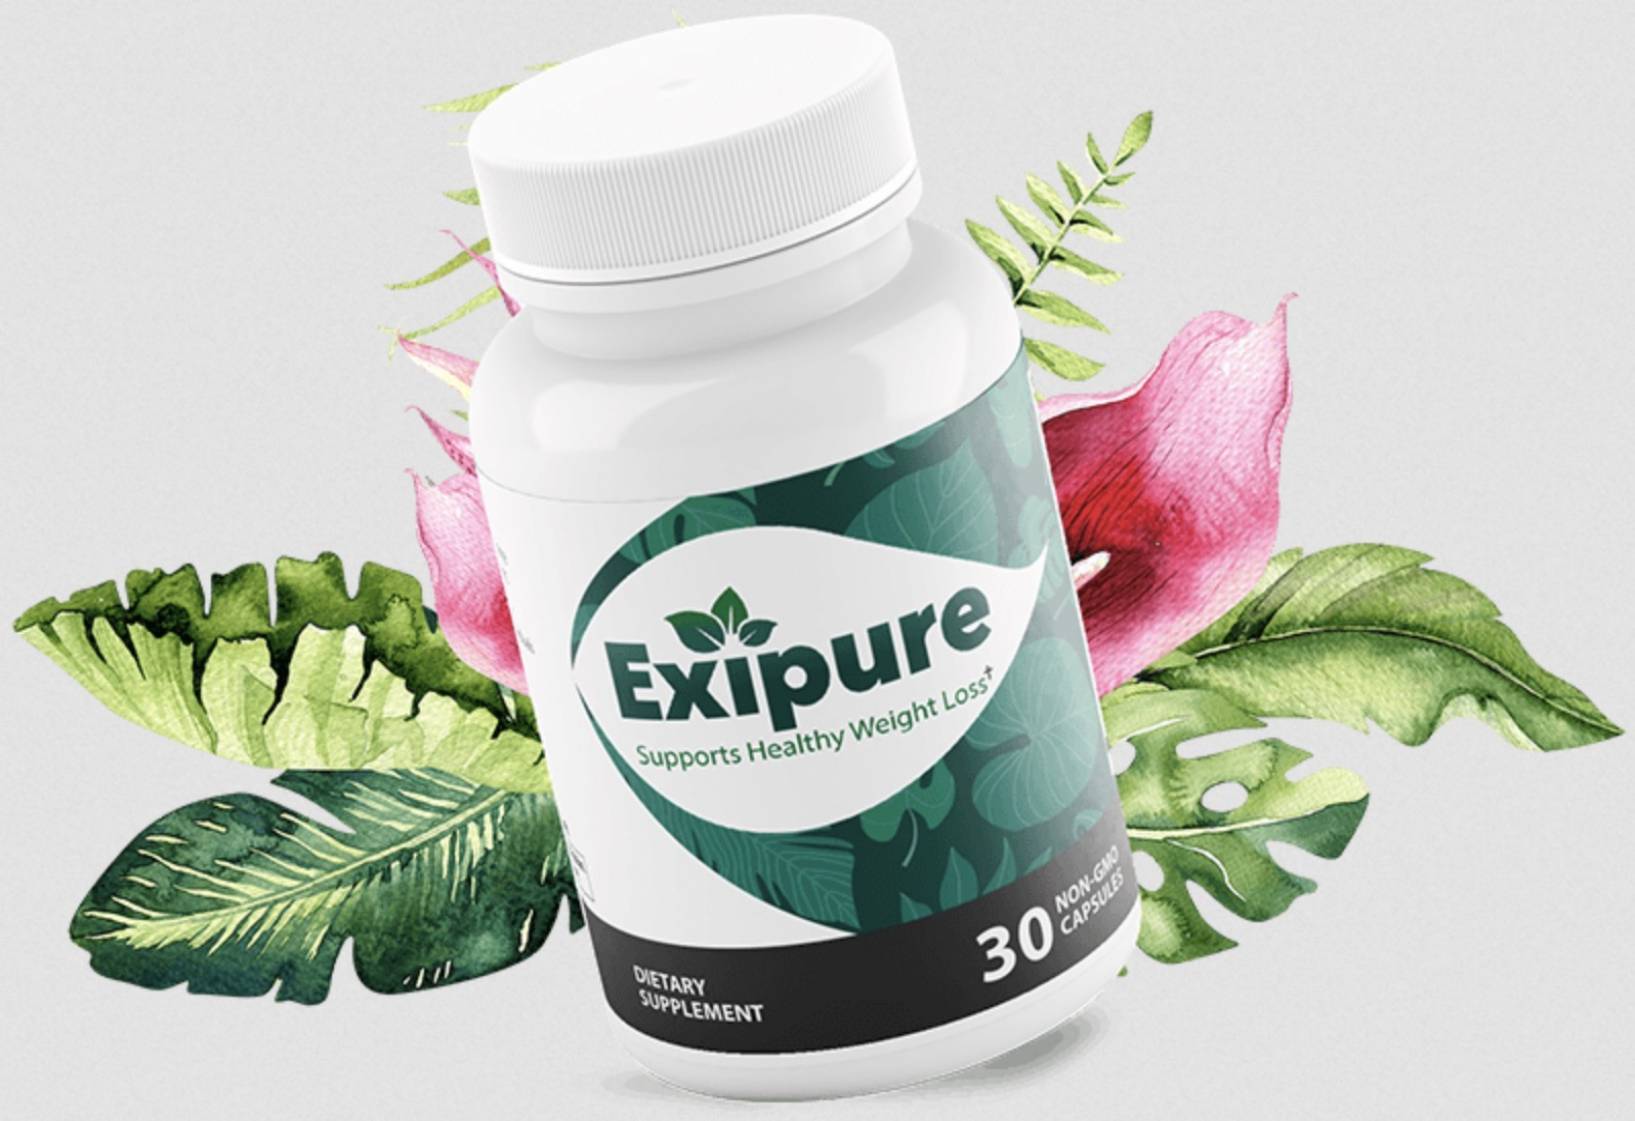 What Is The Best Place To Get Exipure